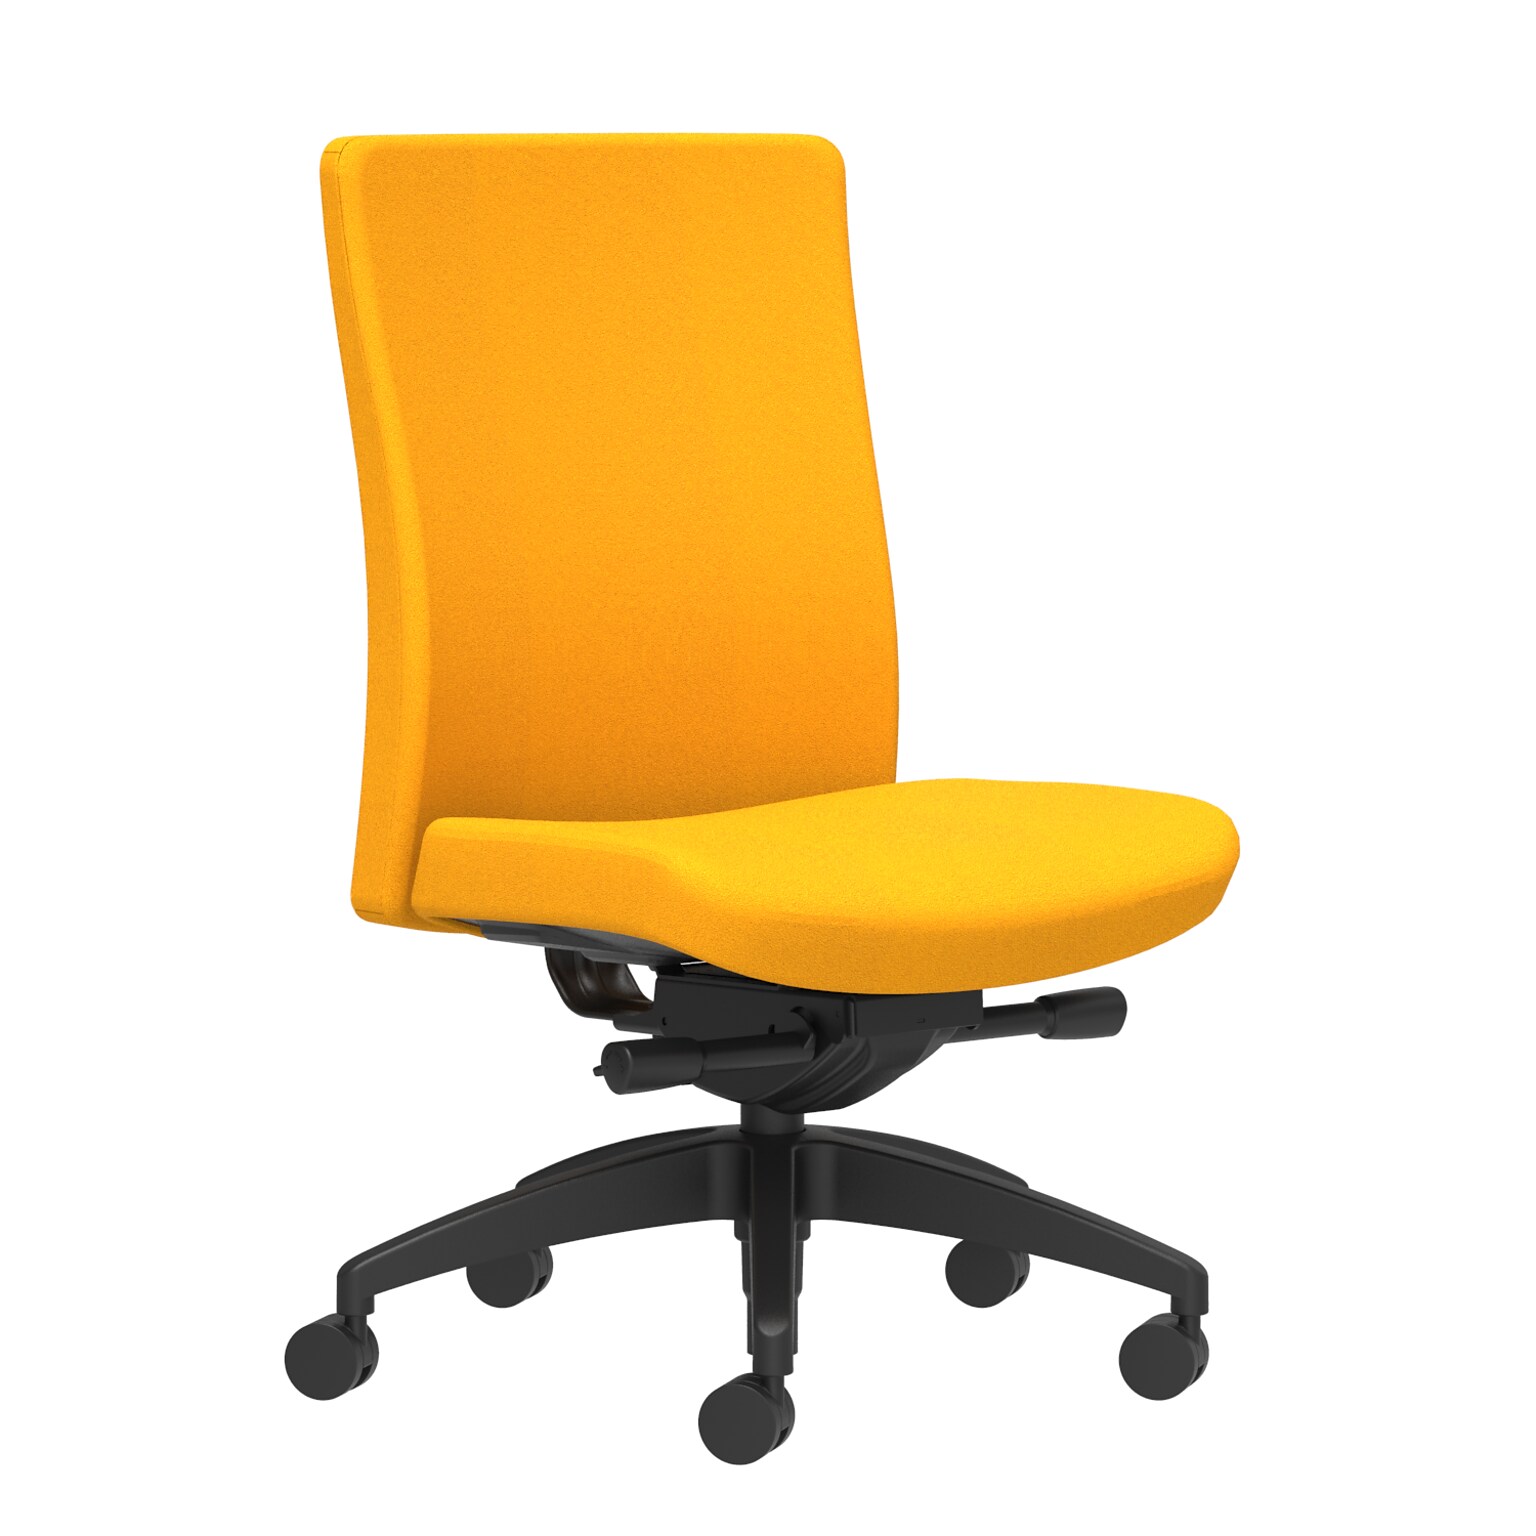 Union & Scale Workplace2.0™ Task Chair Upholstered, Armless, Goldenrod Fabric, Synchro Tilt Seat Slide (54196)